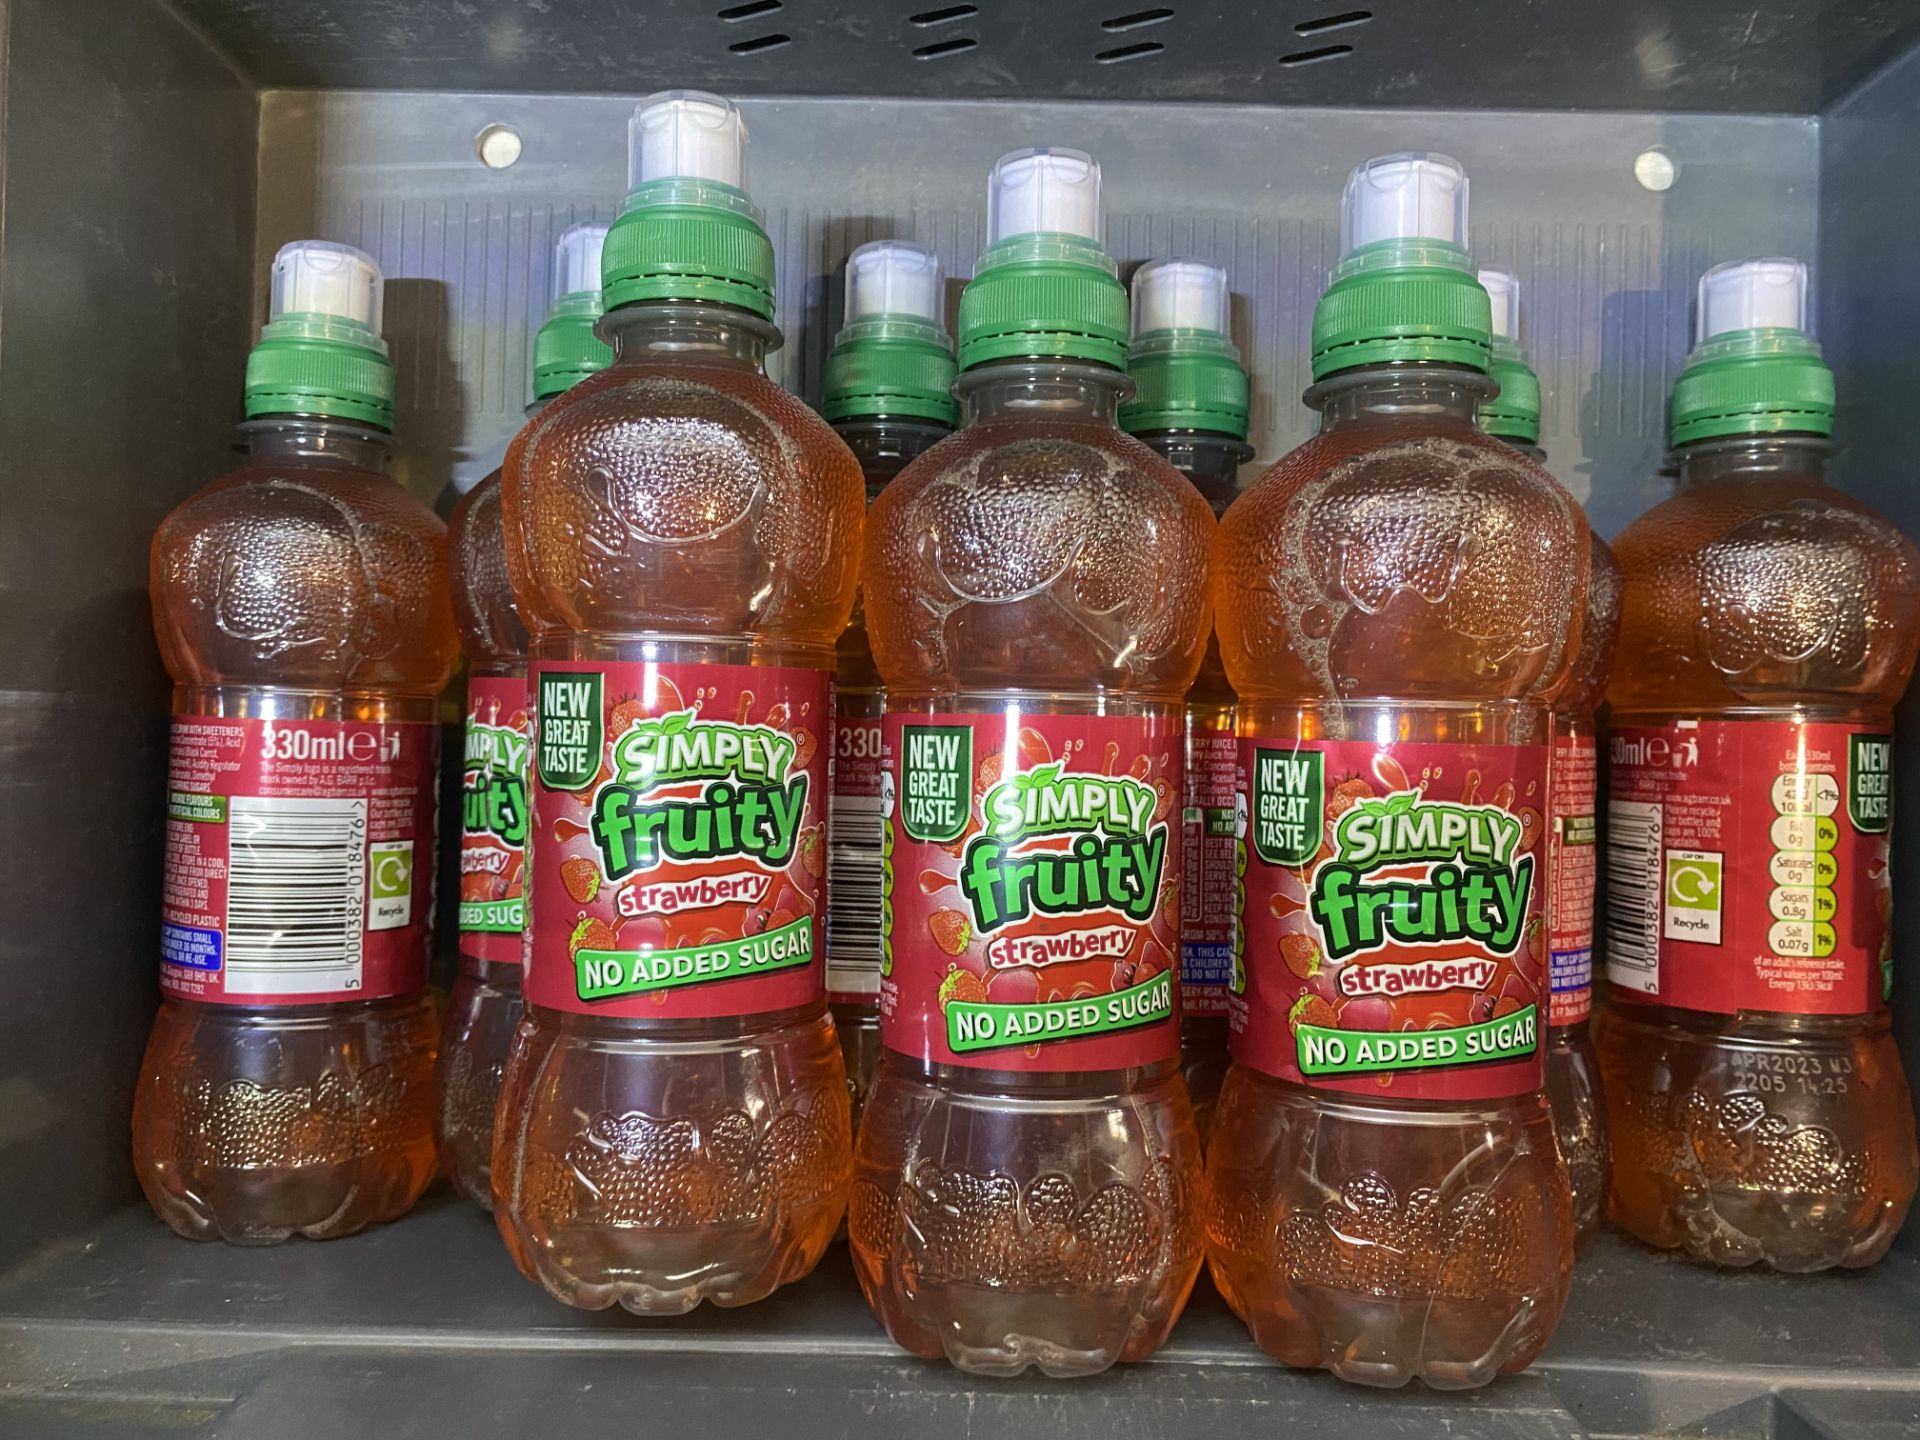 56 x Bottles Of Simply Fruity Strawberry Juice, No Added Sugar, 330ml, BBD 23 - Image 2 of 3